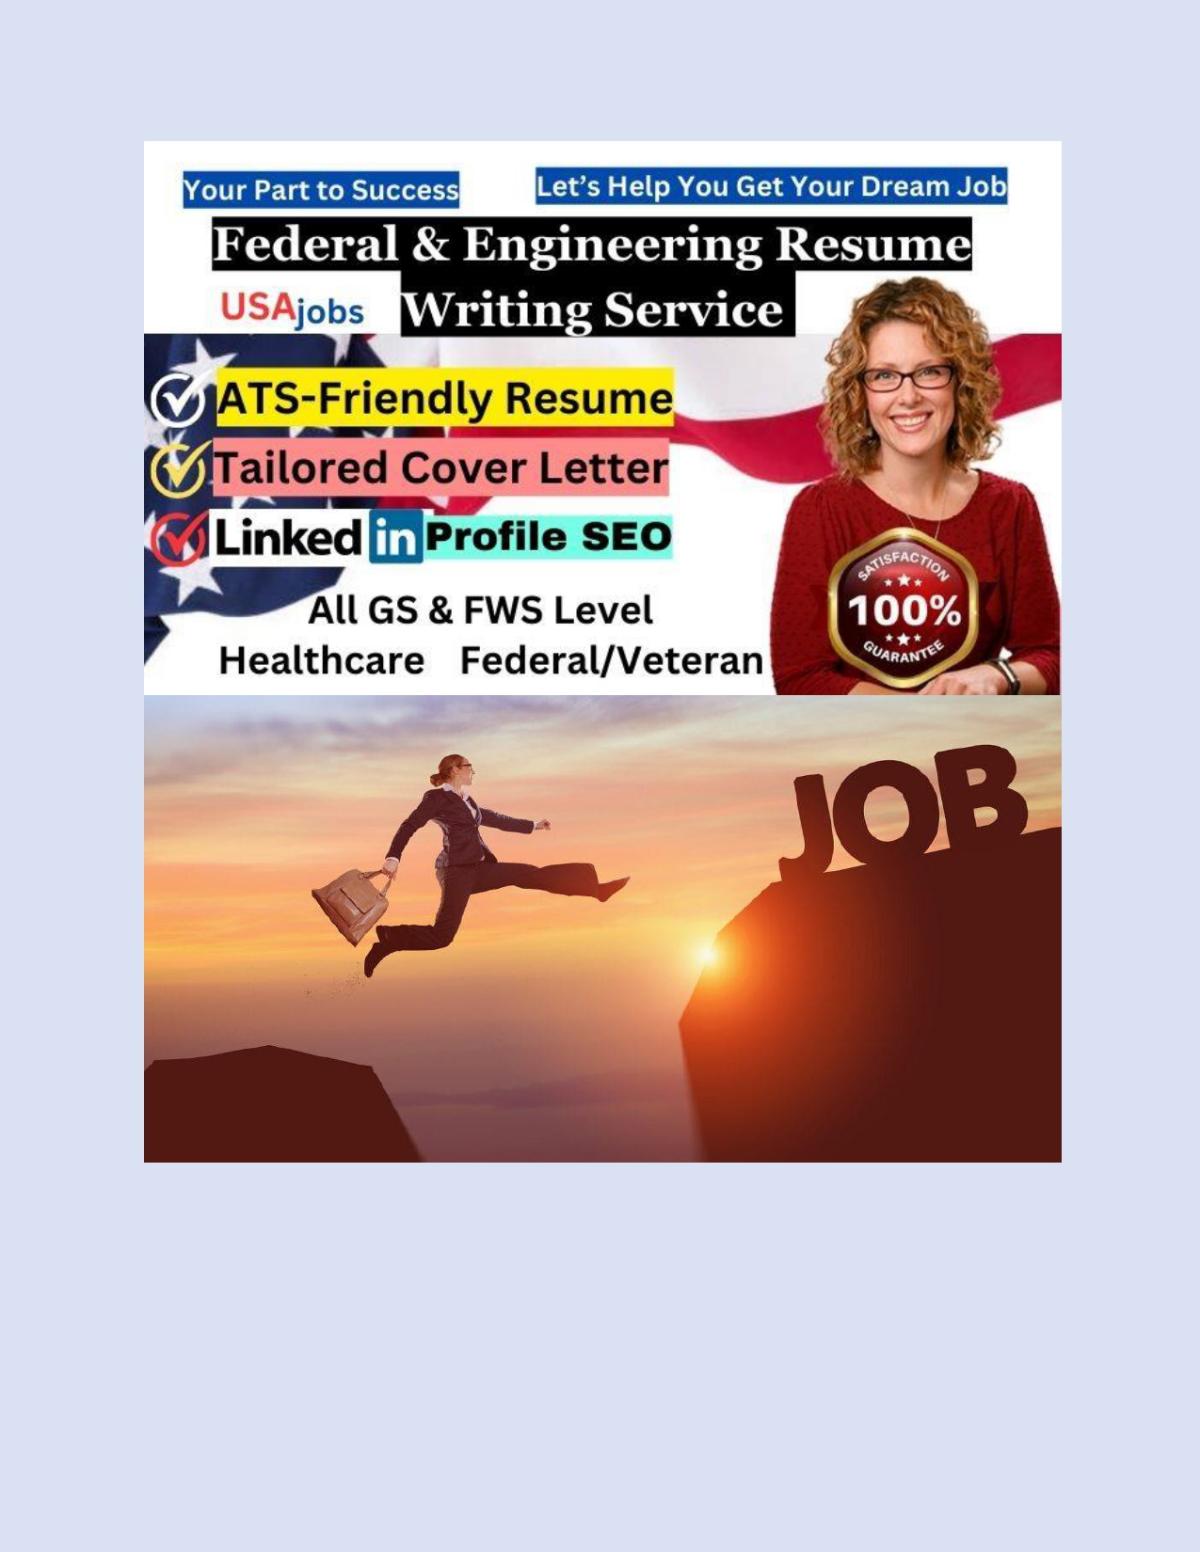 I Will Write a World Class Federal Resume for USAJobs, Military, Veteran Are you looking for a professional resume writer who can help you land that coveted federal job? Look no further! With my expertise in crafting resumes for USAJobs, I can help you create a world-class federal resume that will catch the attention of hiring managers. Targeted Position with ATS/ECQ/KSA Response Applying for a specific federal position and need a tailored resume? I specialize in creating targeted resumes that align with the specific job requirements, while also optimizing them for Applicant Tracking Systems (ATS) and addressing Executive Core Qualifications (ECQ) and Knowledge, Skills, and Abilities (KSA) responses. Why Choose Me? Years of experience in federal resume writing Customized resumes for diverse federal job positions Expertise in ATS optimization and KSA responses Fast turnaround time 100% satisfaction guaranteed Don’t miss out on your chance to stand out from the competition with a stellar federal resume. Let me help you secure that dream federal job!